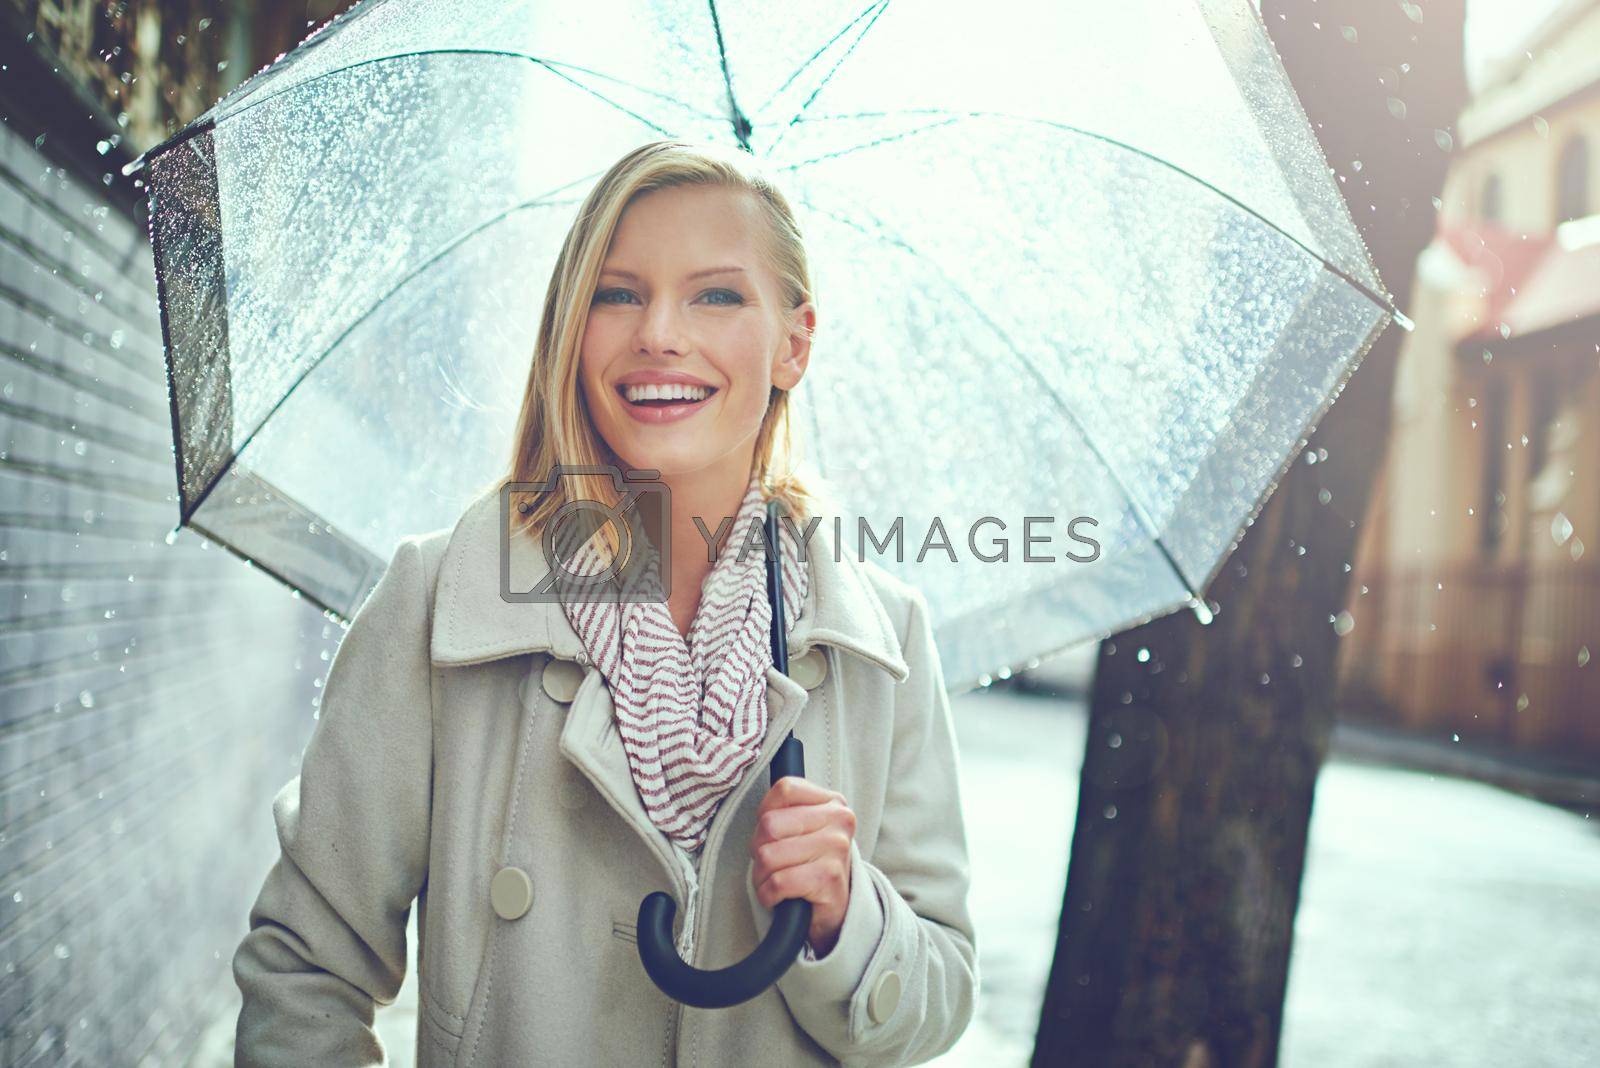 Cropped portrait of an attractive young woman walking in the rain.